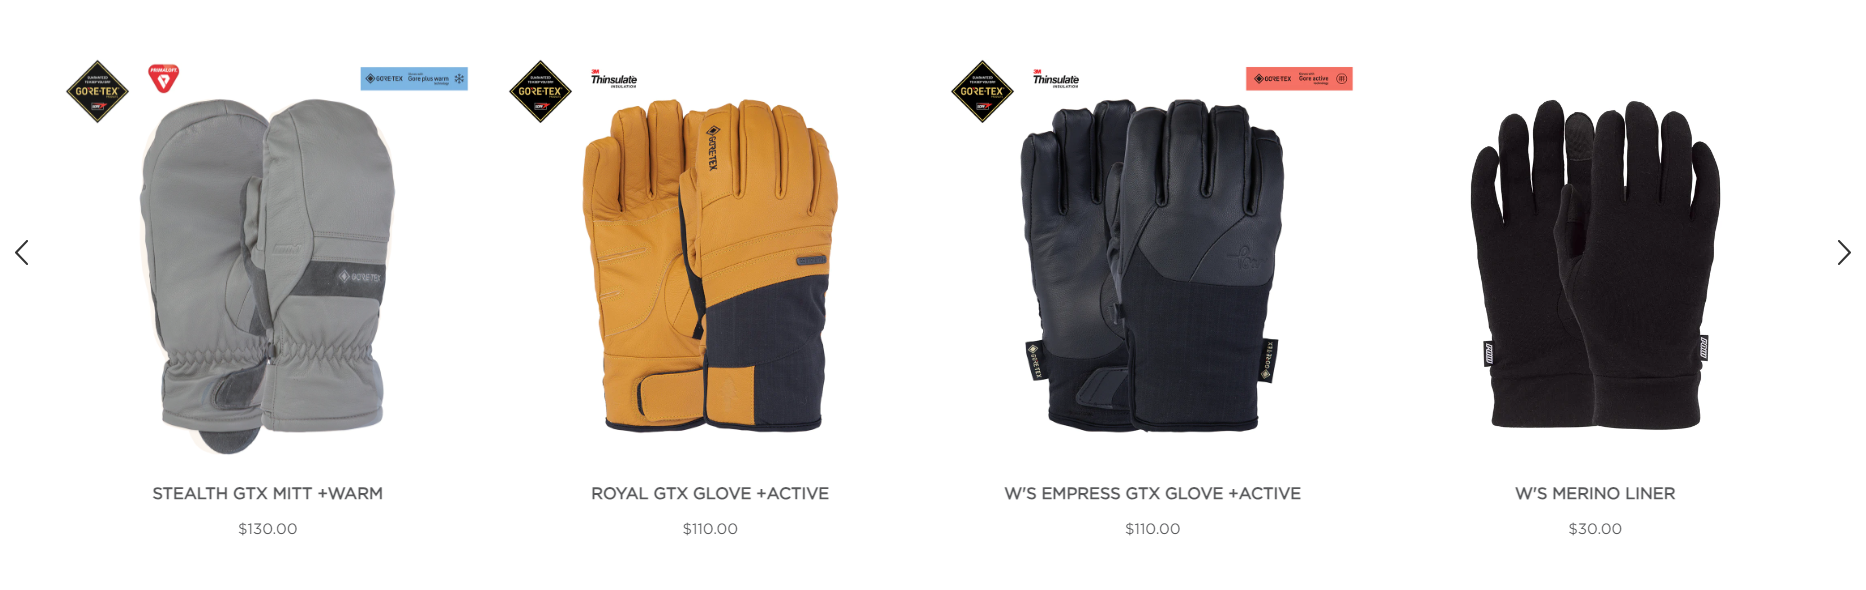 POW Gloves Product Category best ecommerce websites